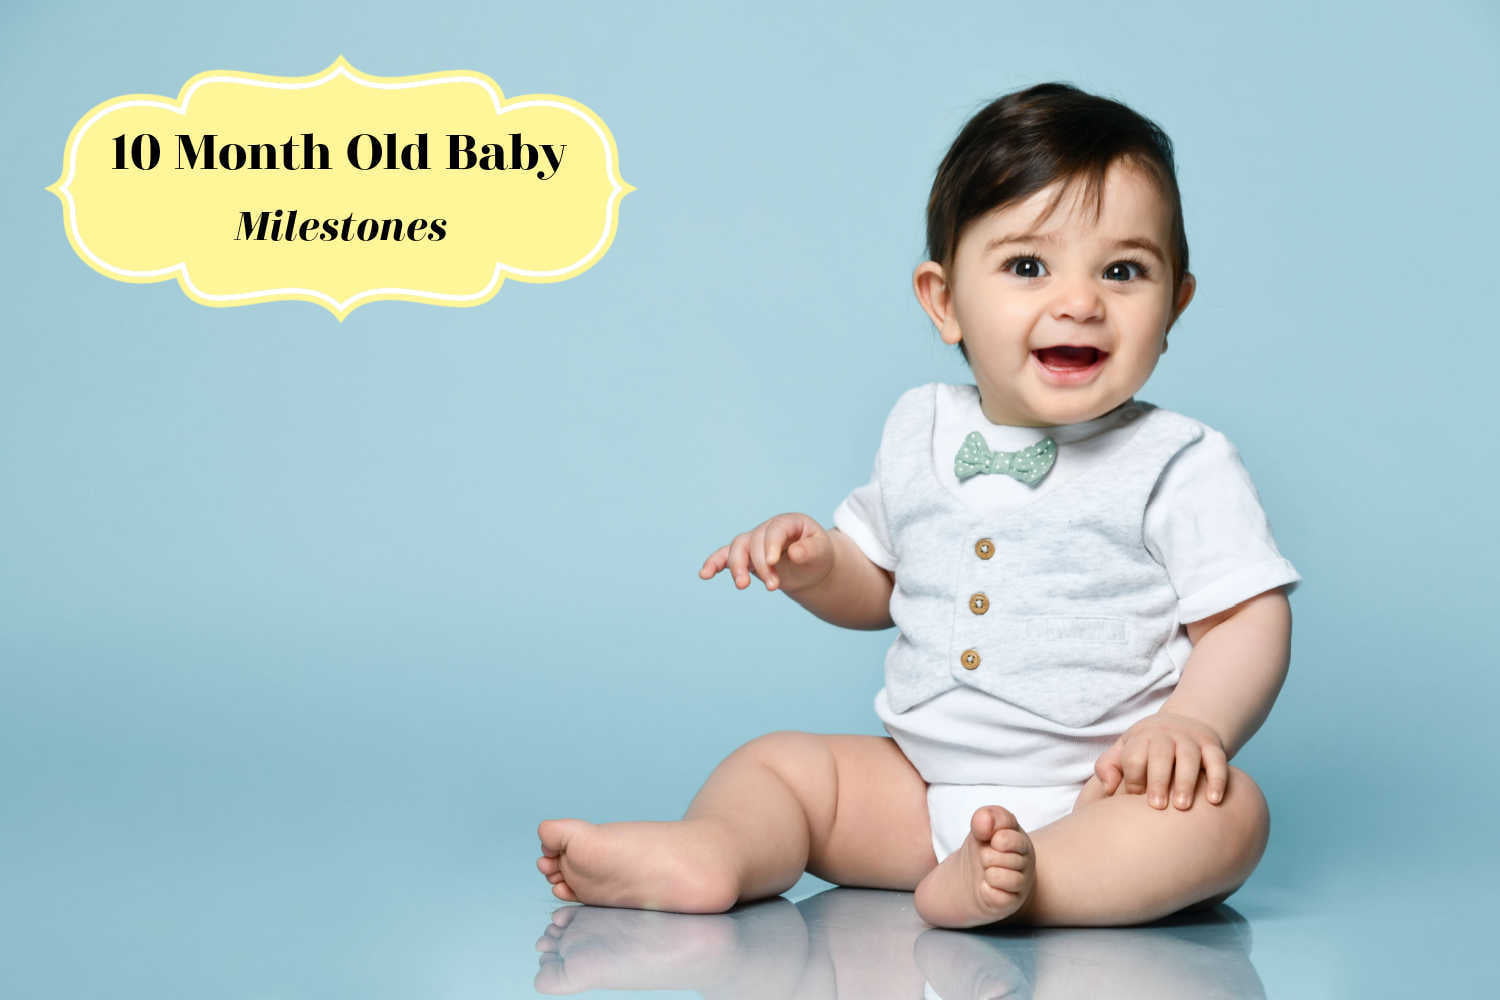 10 Month Old Baby Milestones – What Are They and How to Help Your Baby